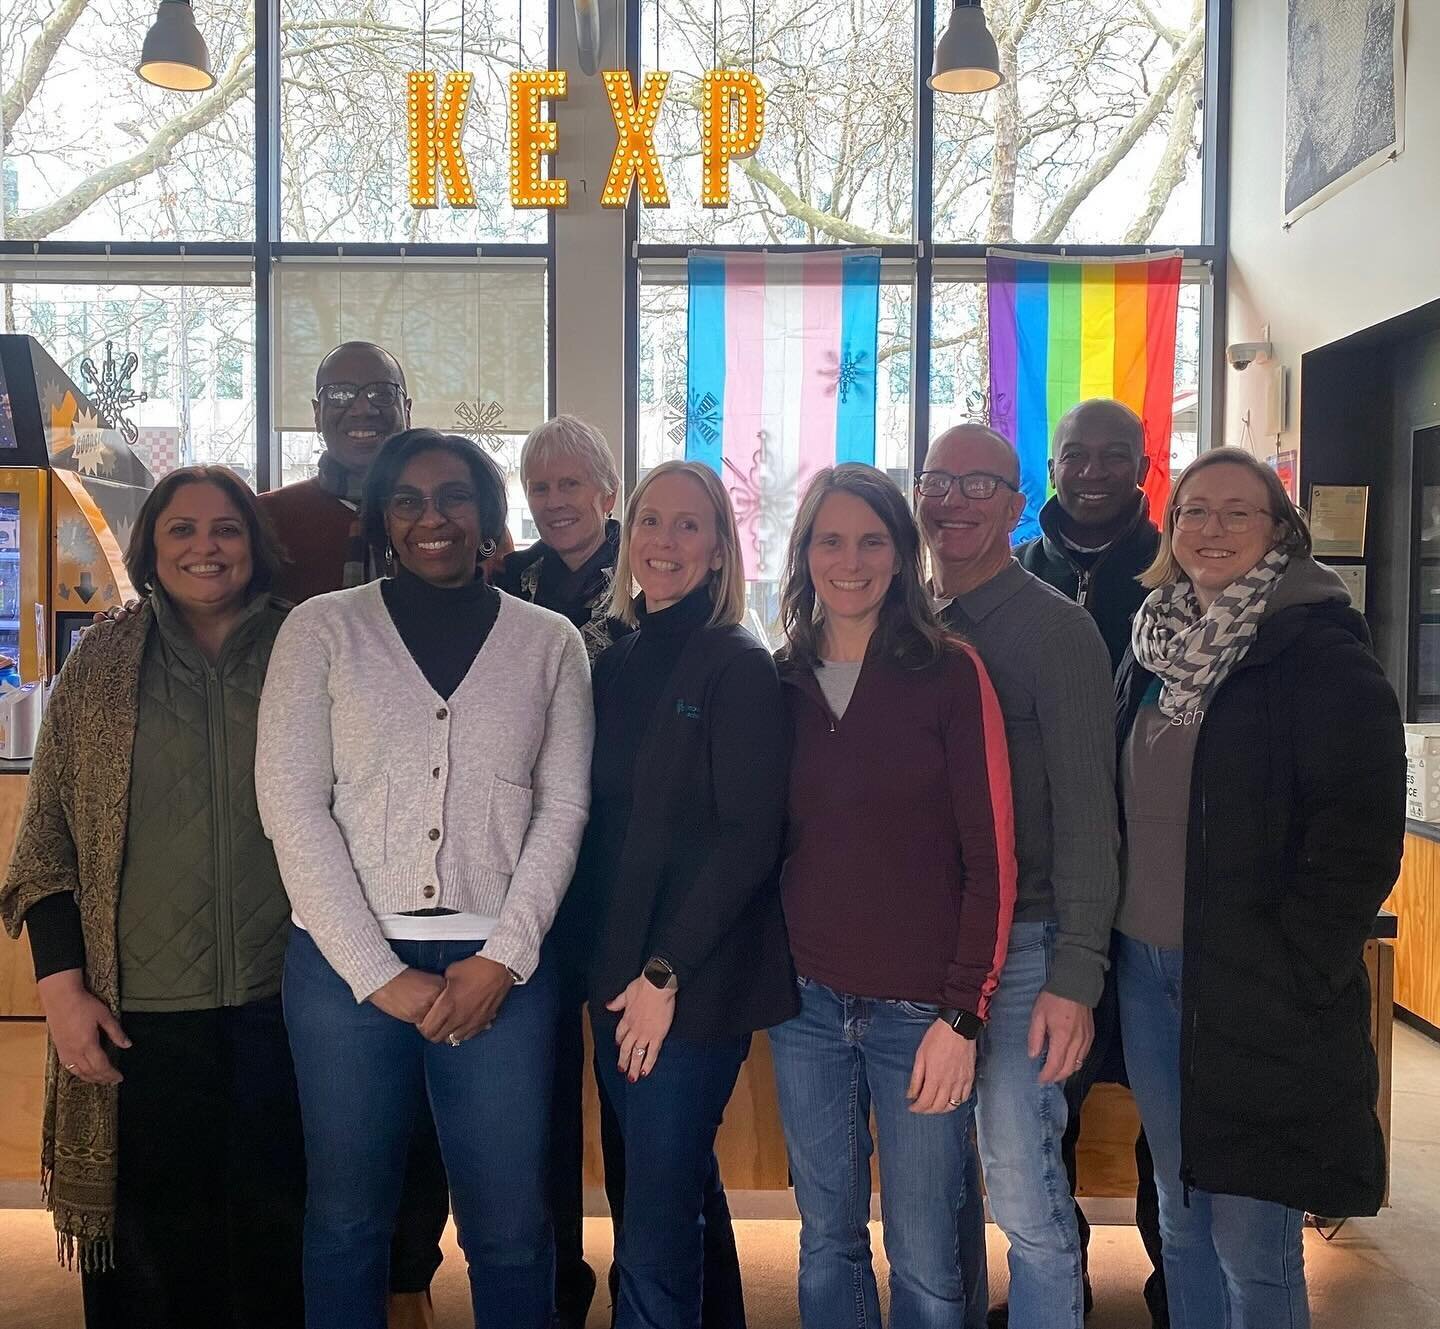 The Downtown School's Advisory Board met this past Friday to reflect on the past and look to the future. Thanks @KEXP for hosting us in your space&mdash;just one of the benefits of being a campus connected to the city.
#dtsconnections #connectedtothe